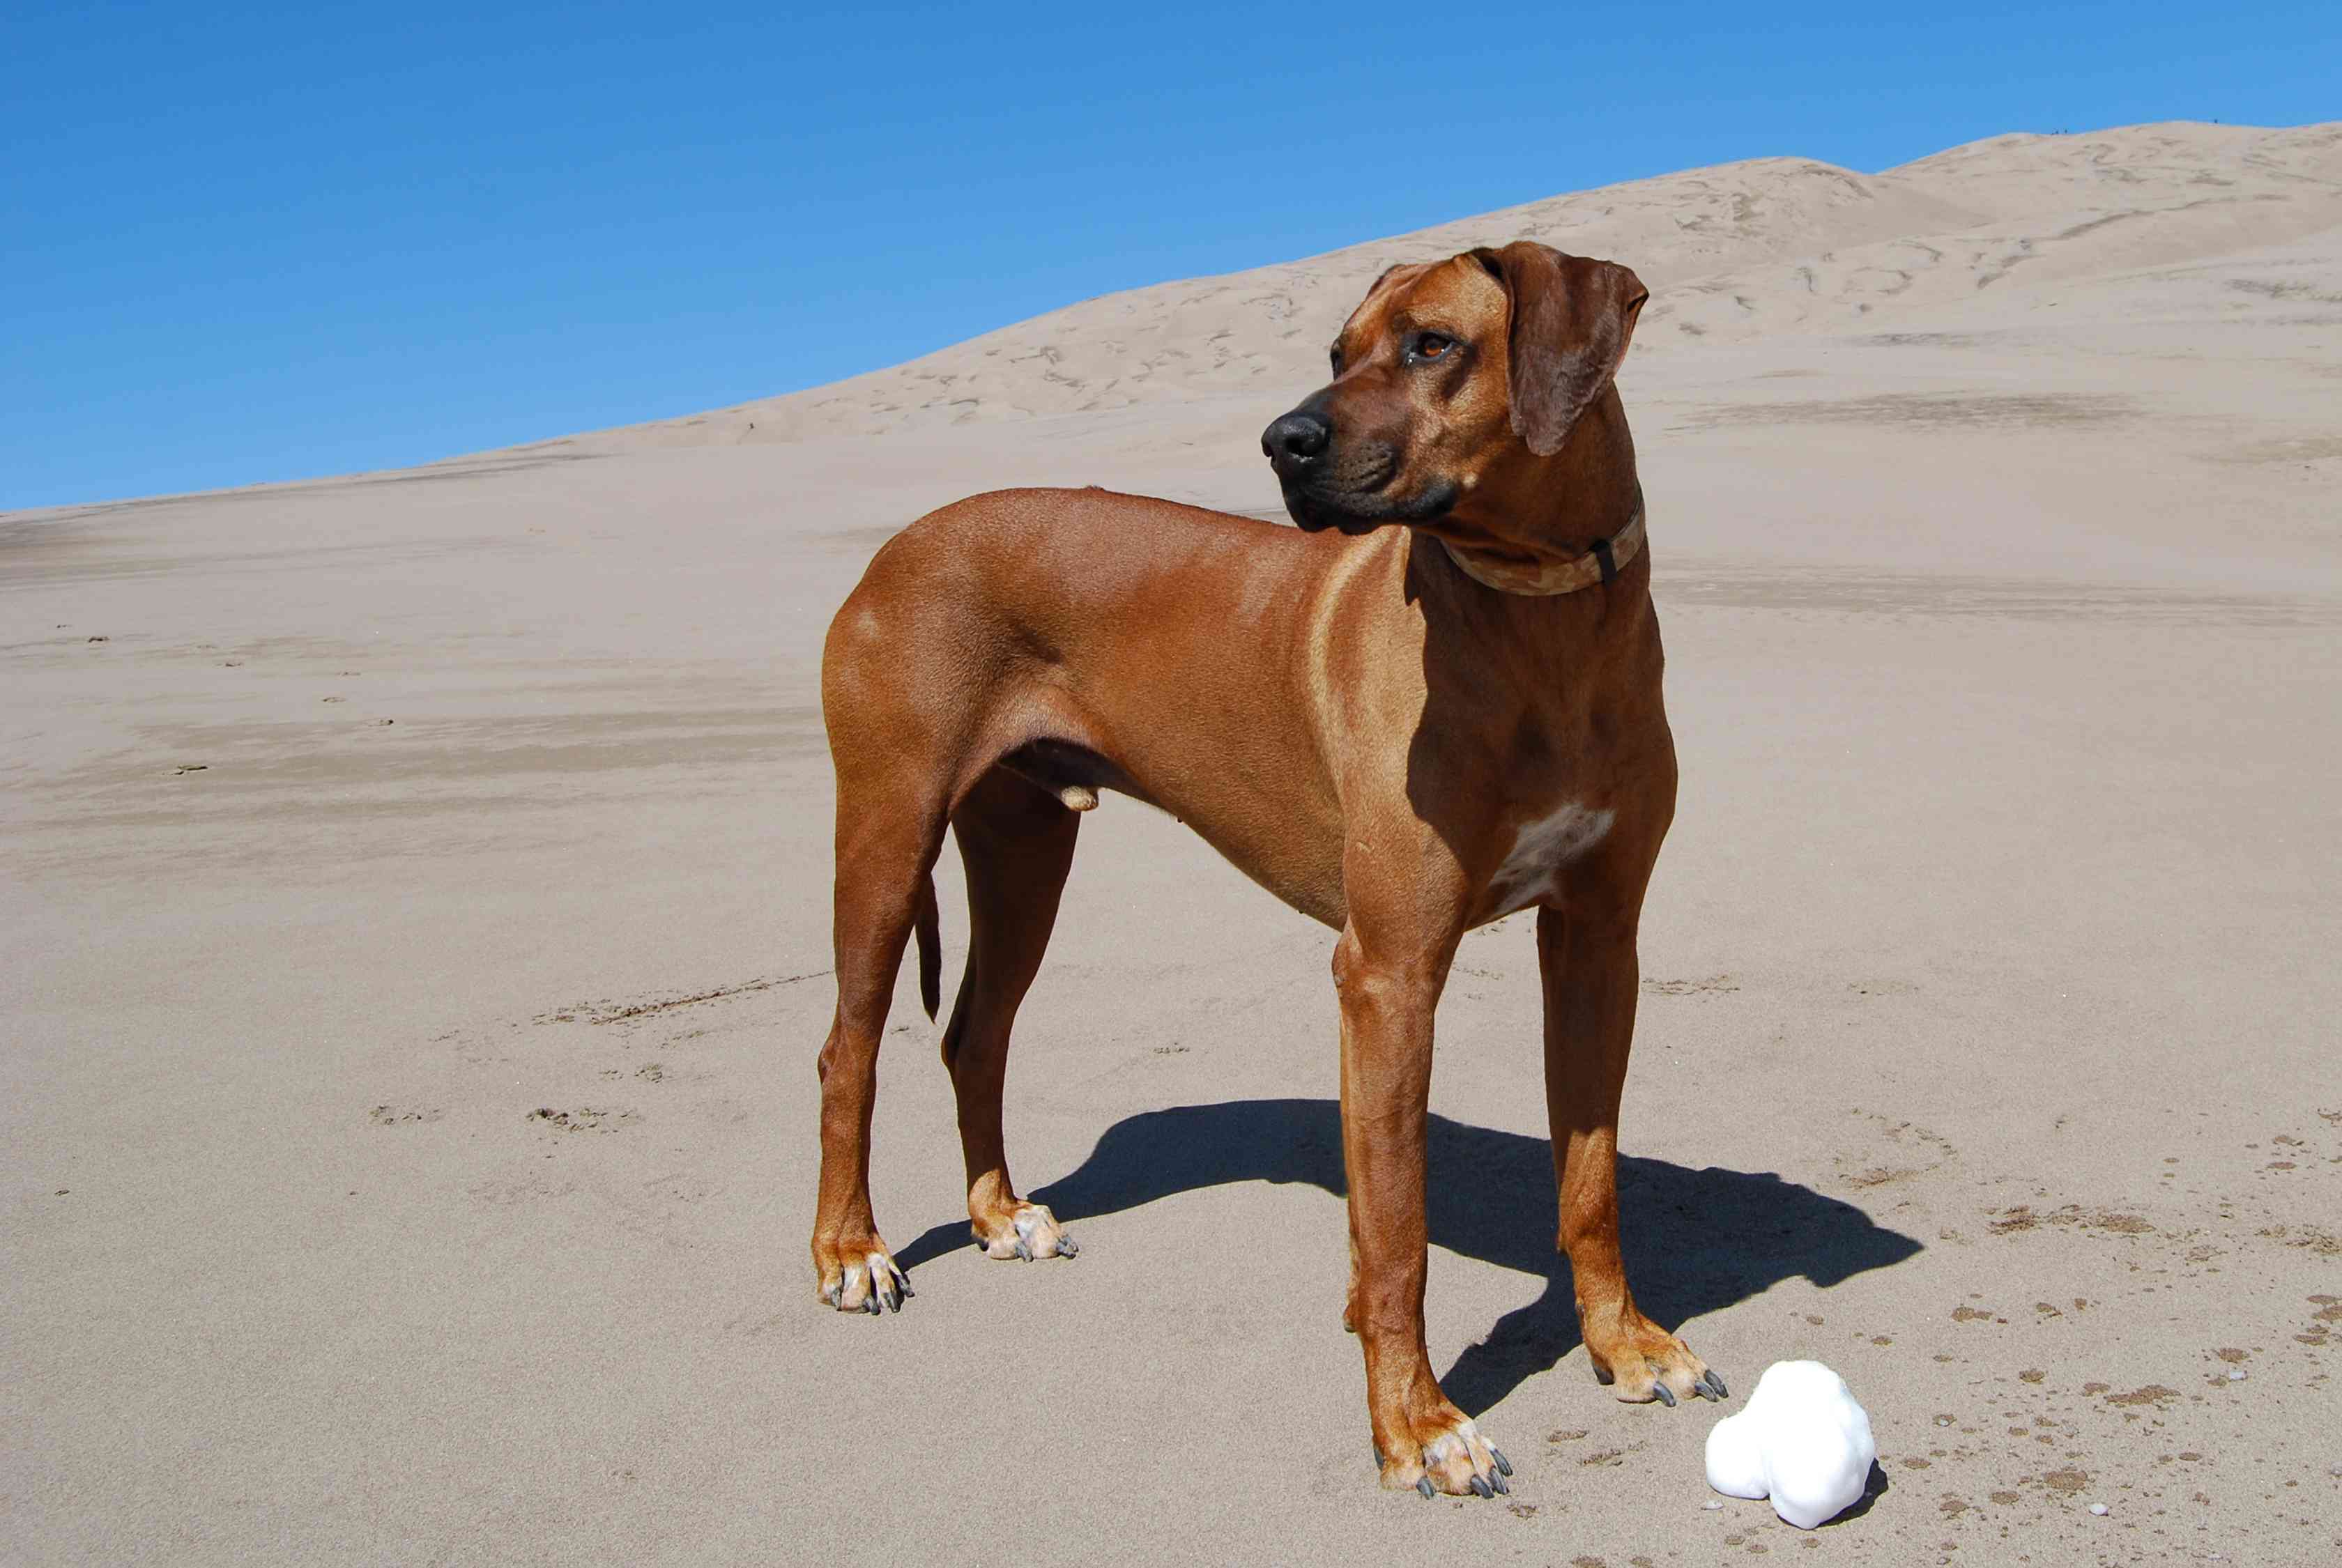 An elegant, brown Rodhesian Ridgeback standing tall on a sand dune with blue sky in the background.